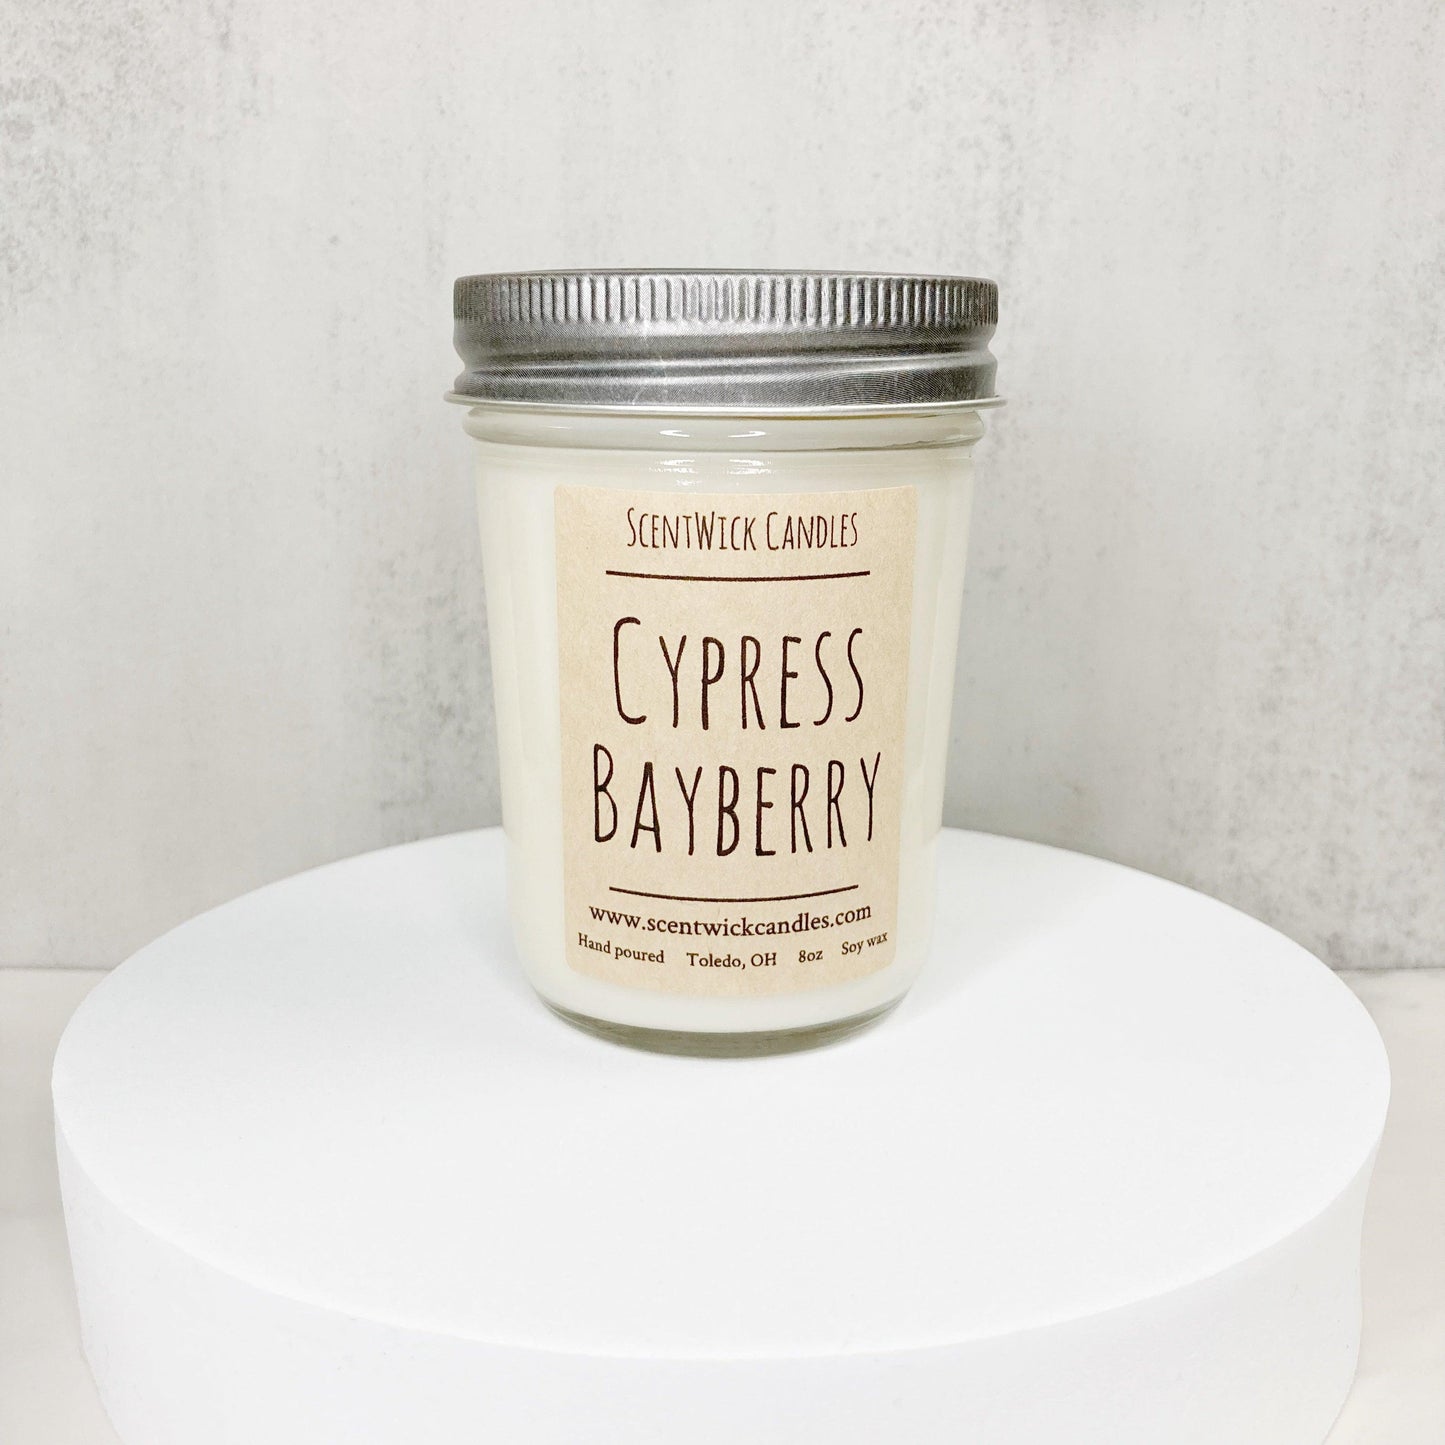 Cypress Bayberry Candle - ScentWick Candles